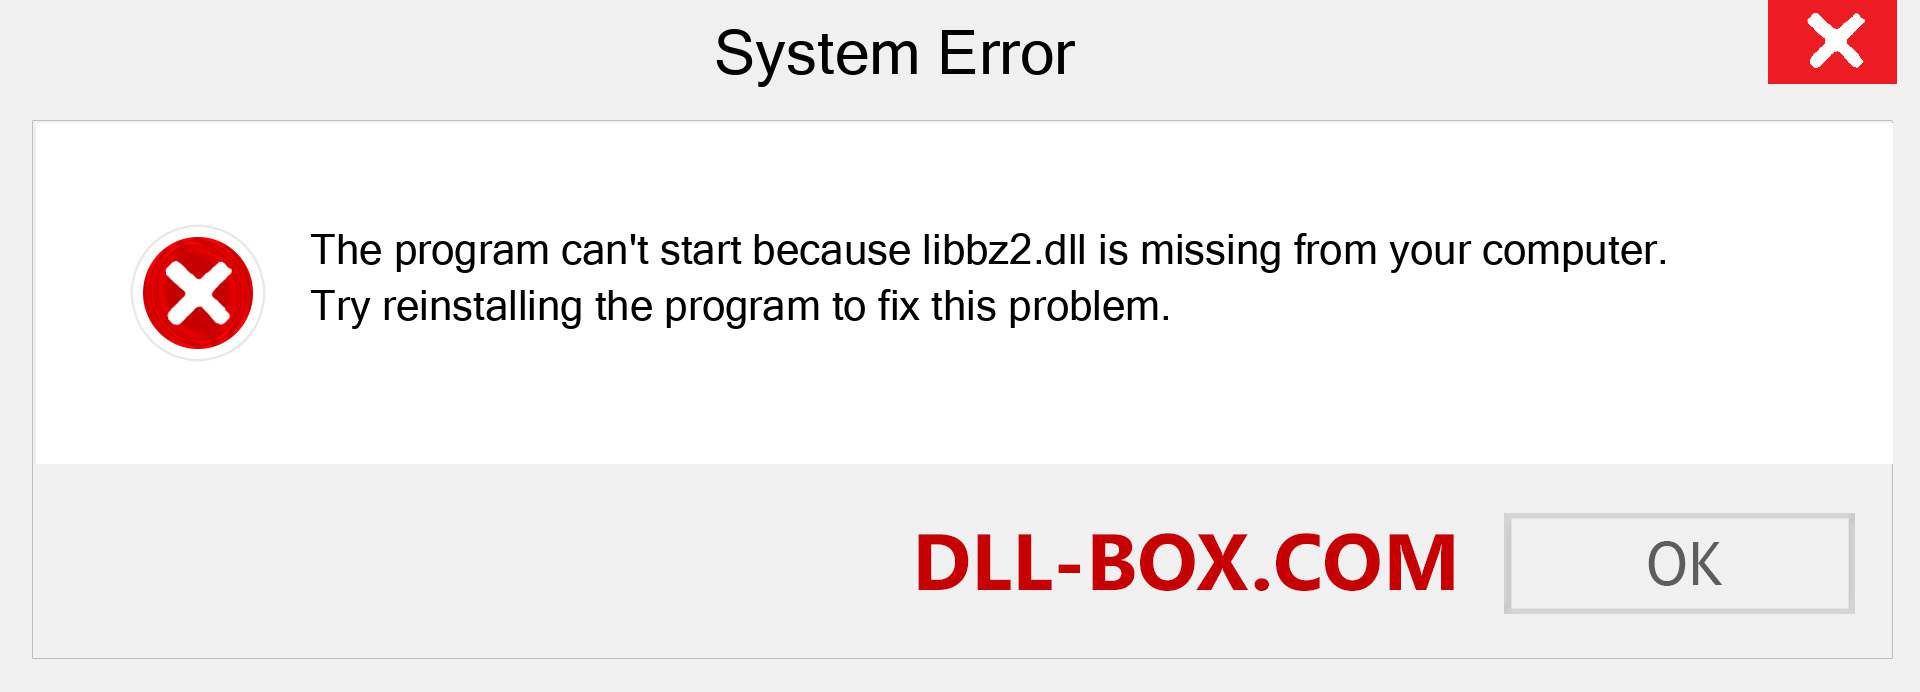  libbz2.dll file is missing?. Download for Windows 7, 8, 10 - Fix  libbz2 dll Missing Error on Windows, photos, images